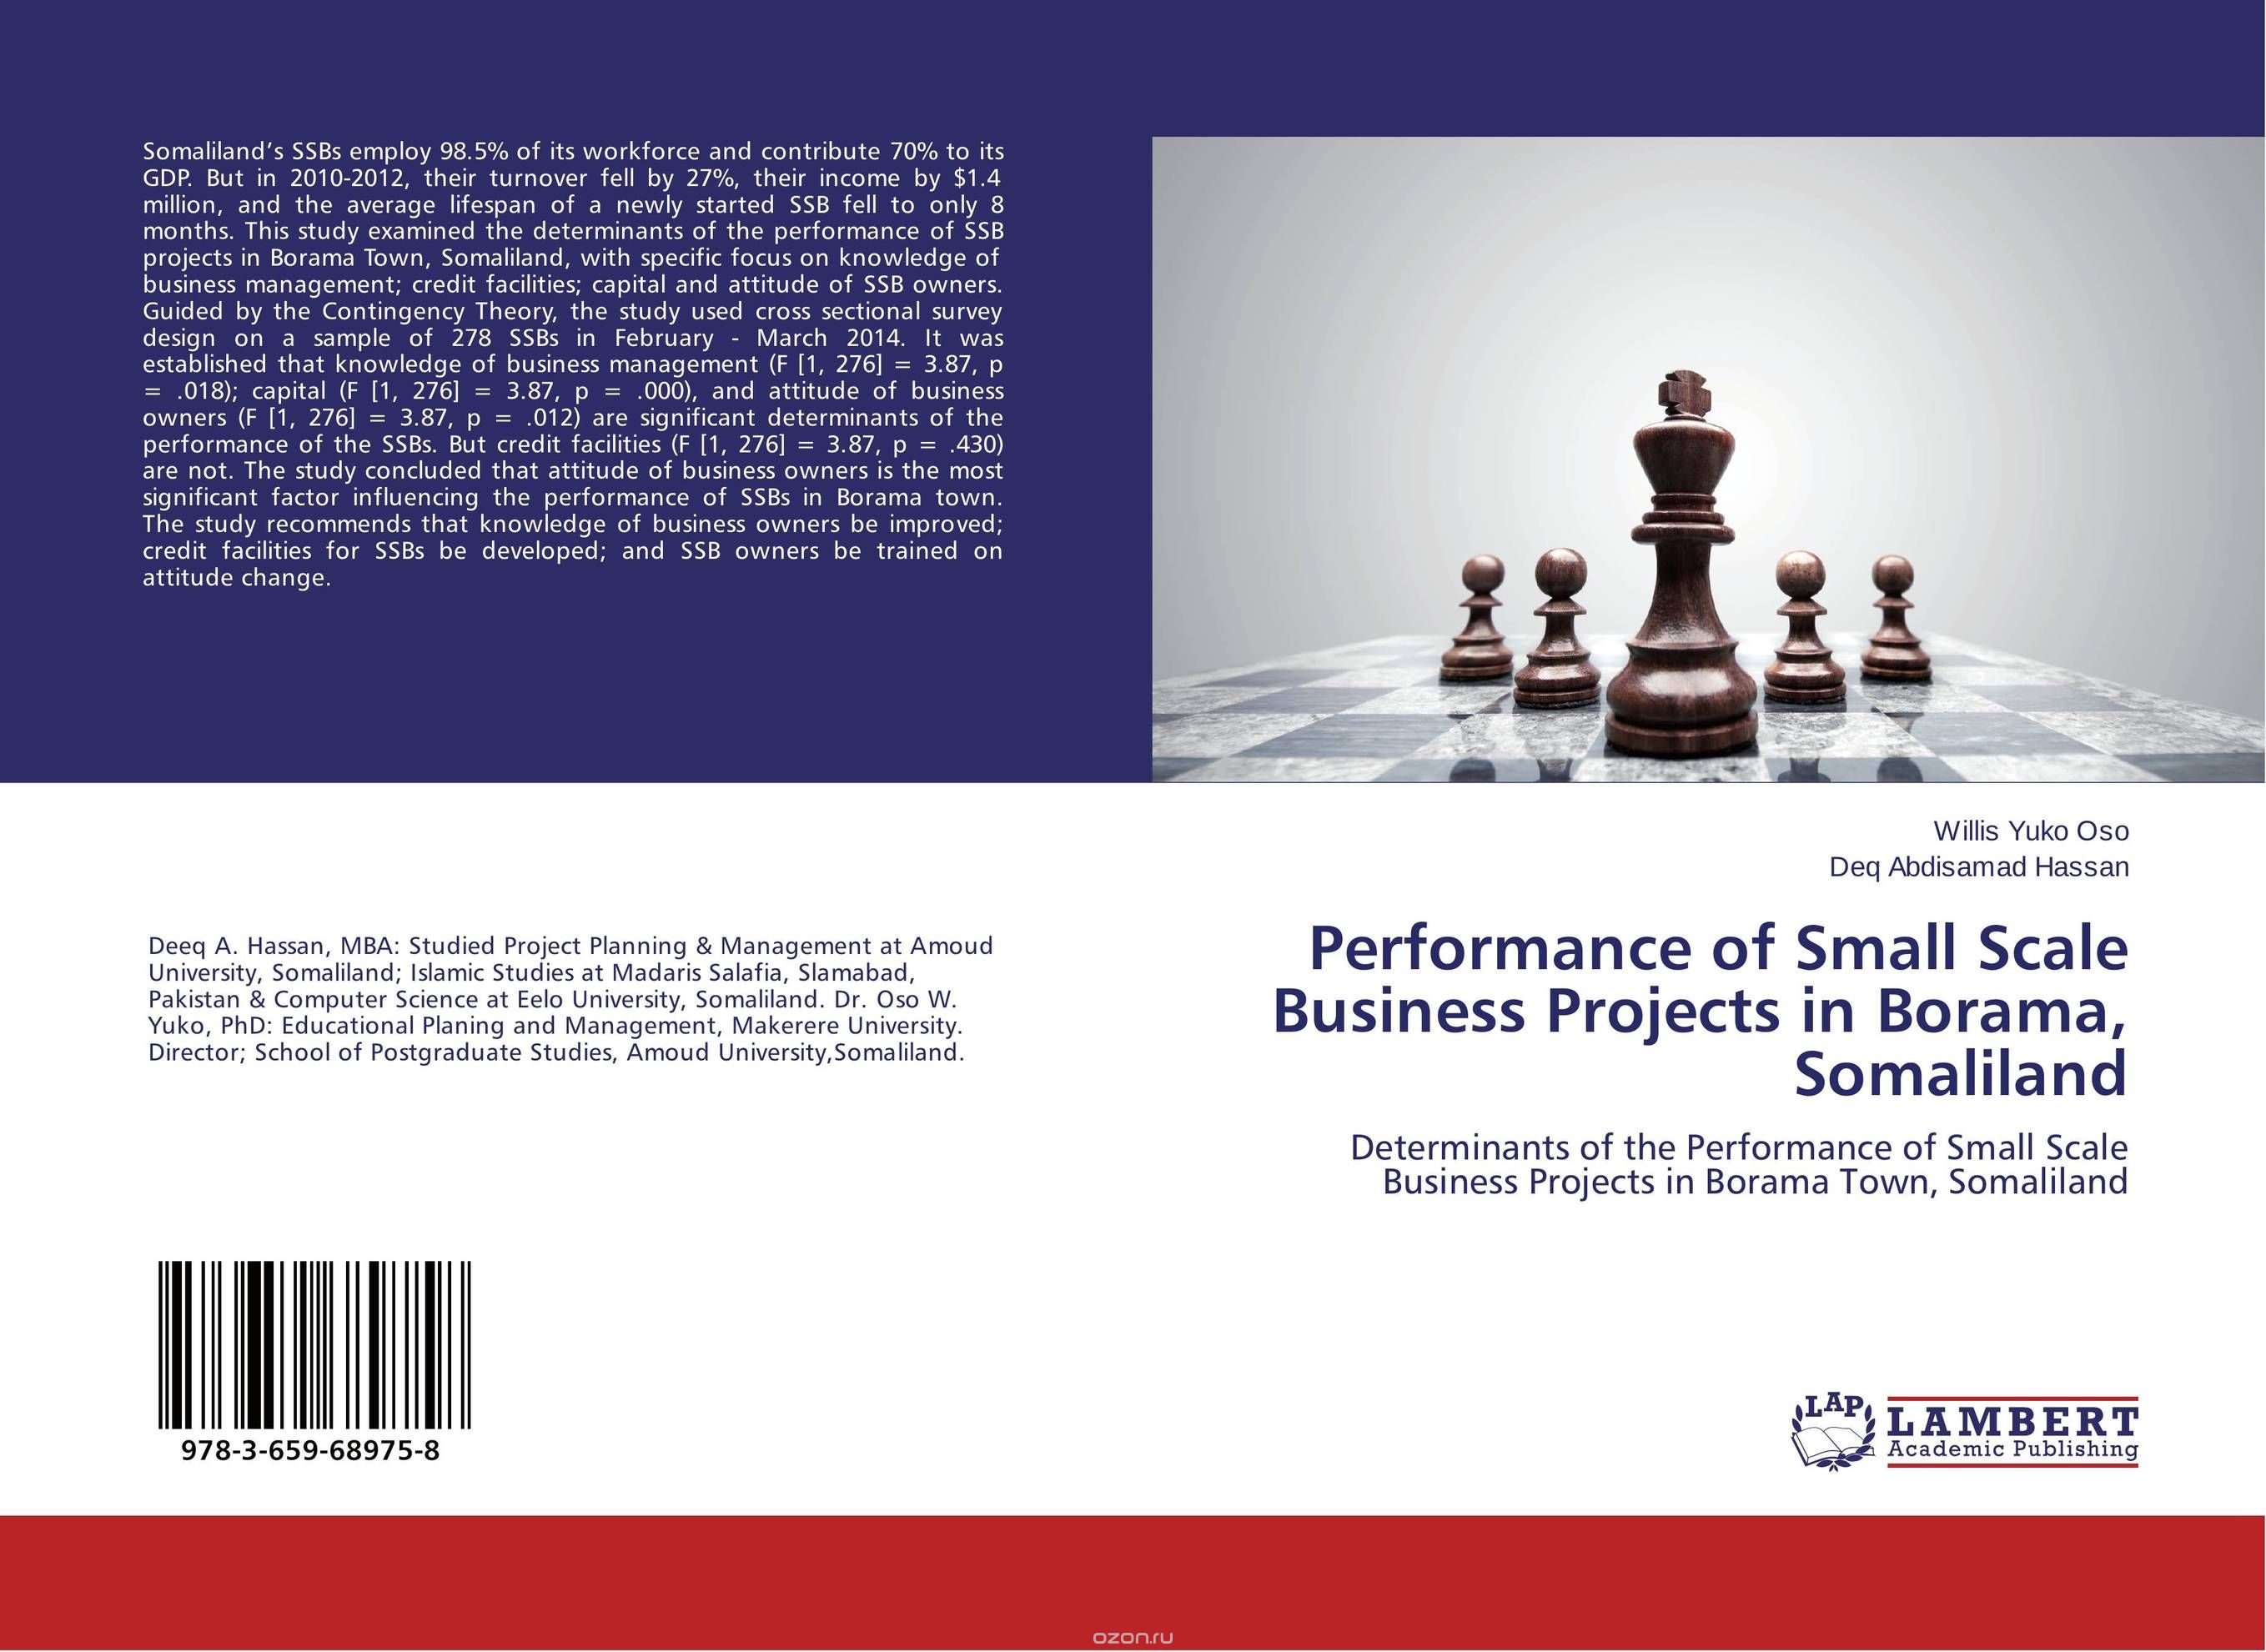 Скачать книгу "Performance of Small Scale Business Projects in Borama, Somaliland"